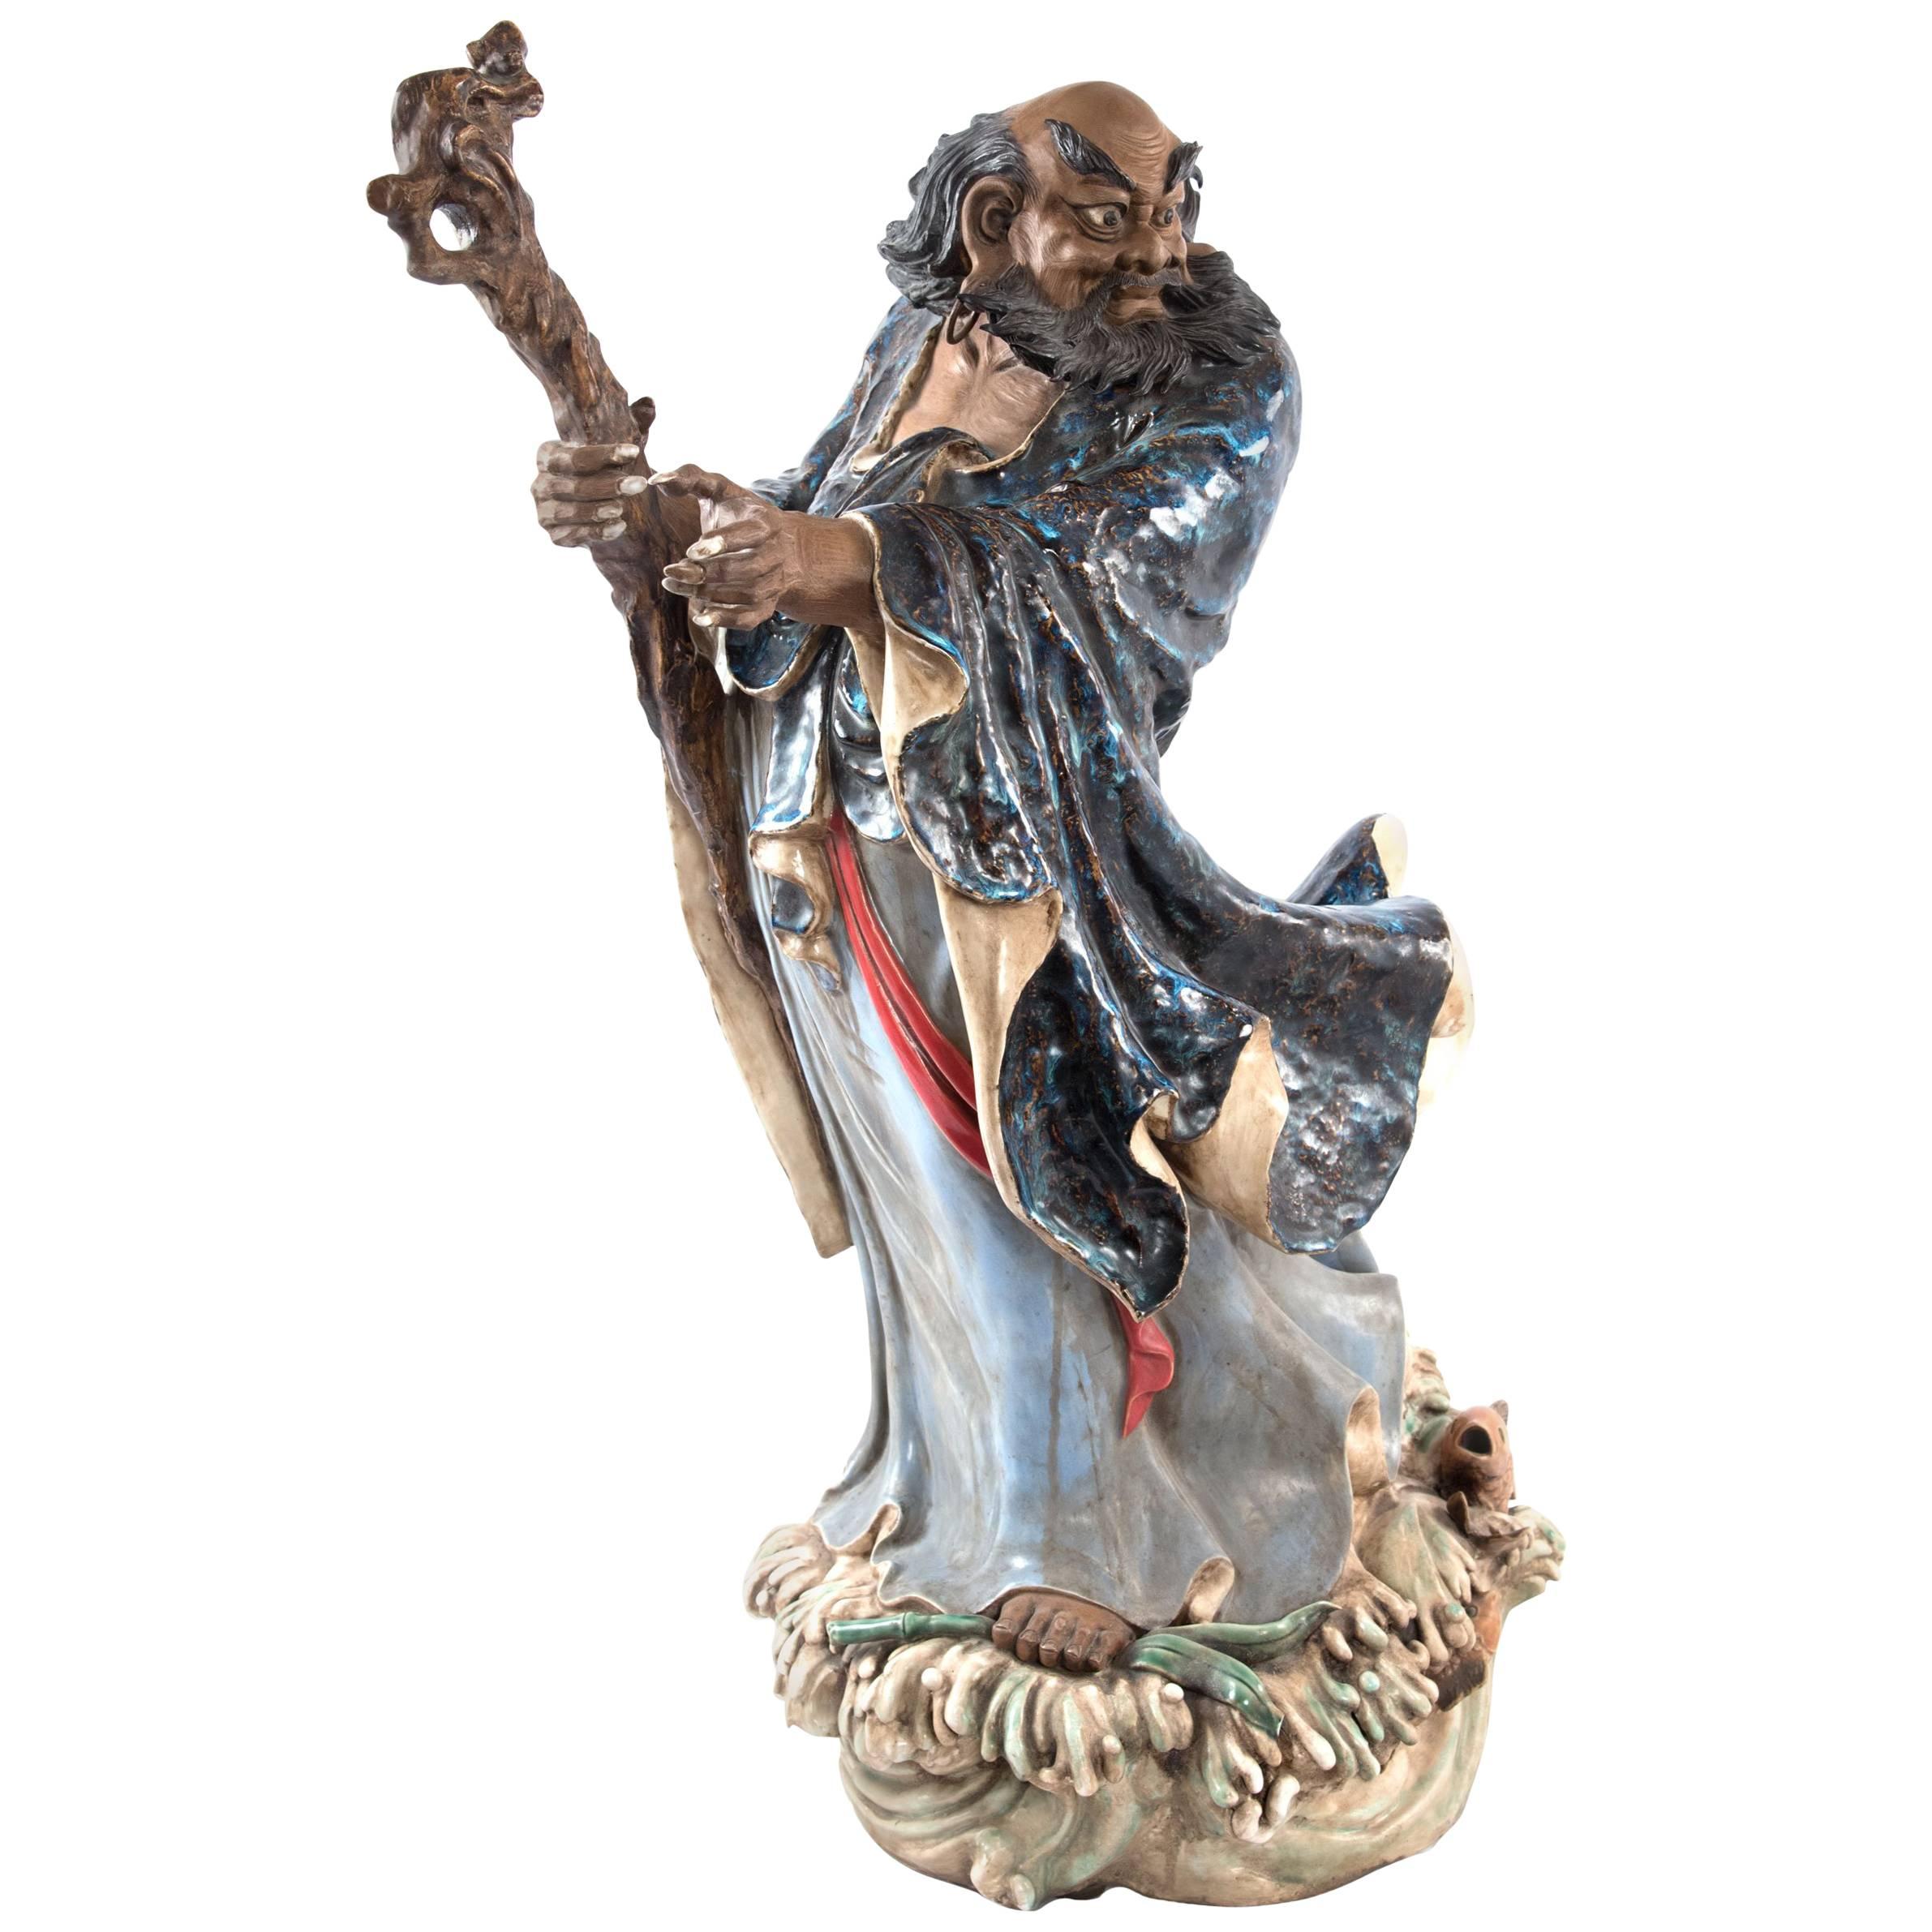 19th Century Sculpture of Chinese Deity or Immortal